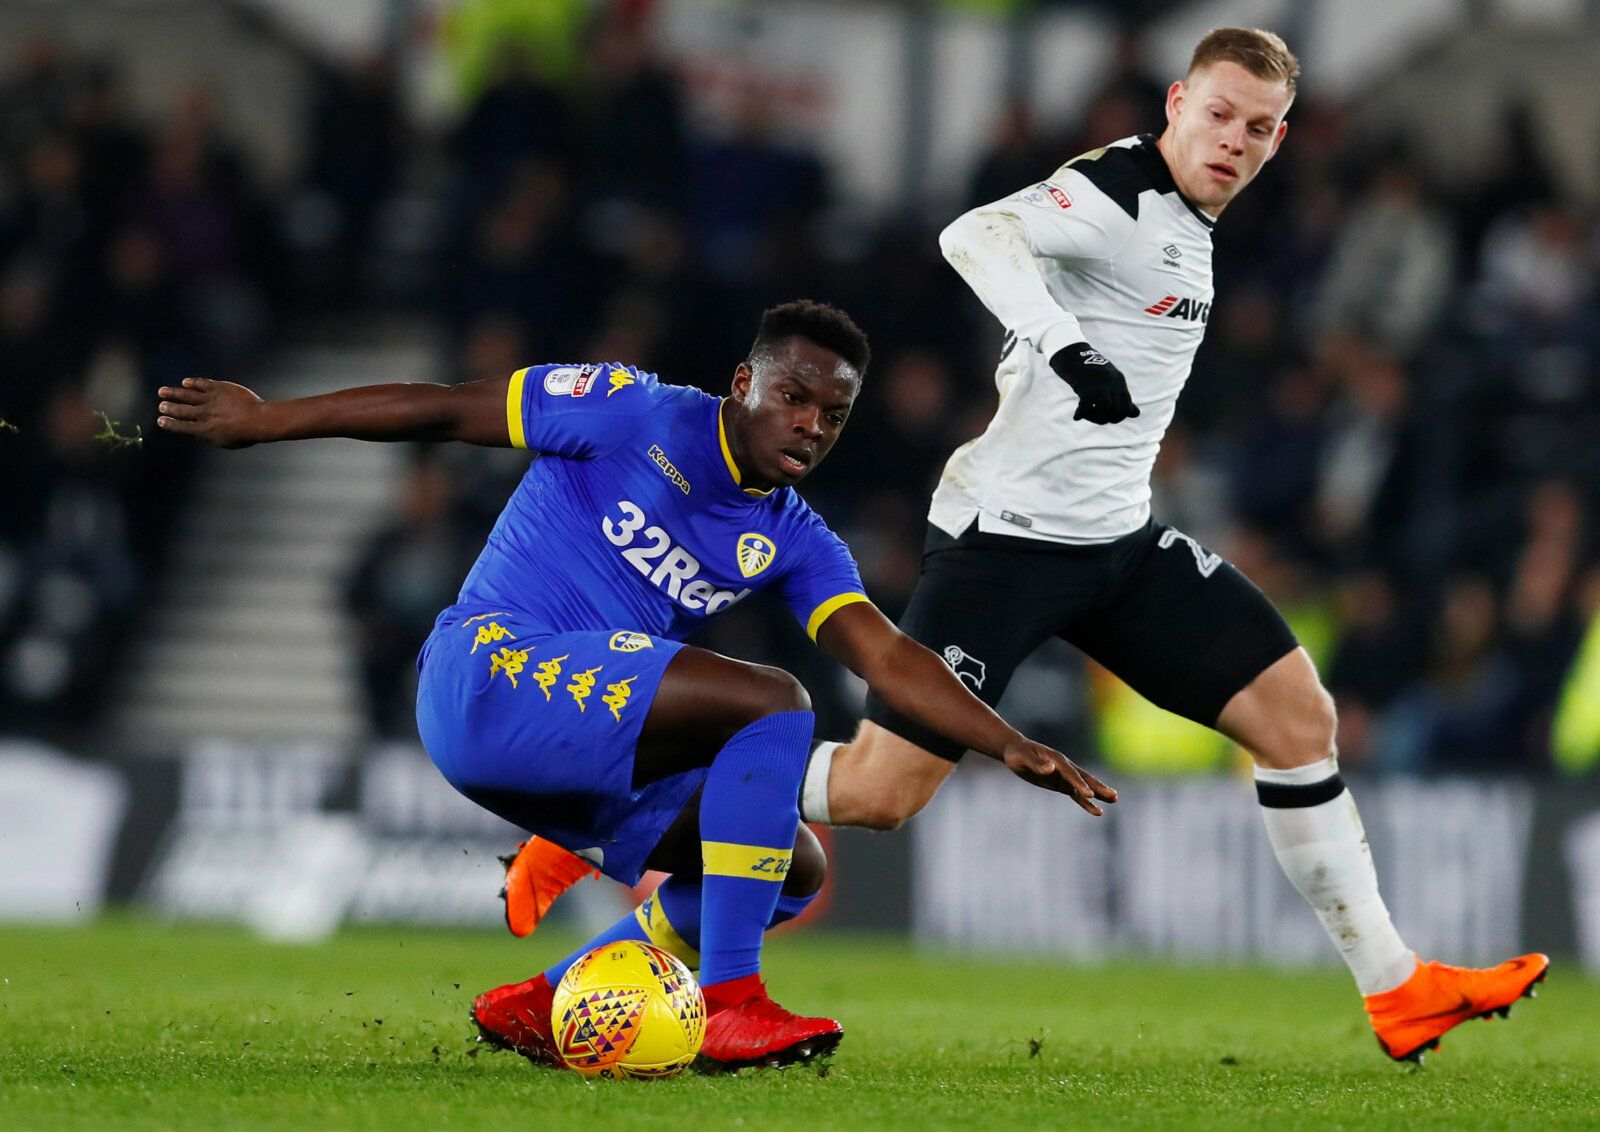 Soccer Football - Championship - Derby County vs Leeds United - Pride Park, Derby, Britain - February 21, 2018   Leeds United's Ronaldo Vieira in action with Derby County's Matej Vydra   Action Images/Jason Cairnduff    EDITORIAL USE ONLY. No use with unauthorized audio, video, data, fixture lists, club/league logos or 